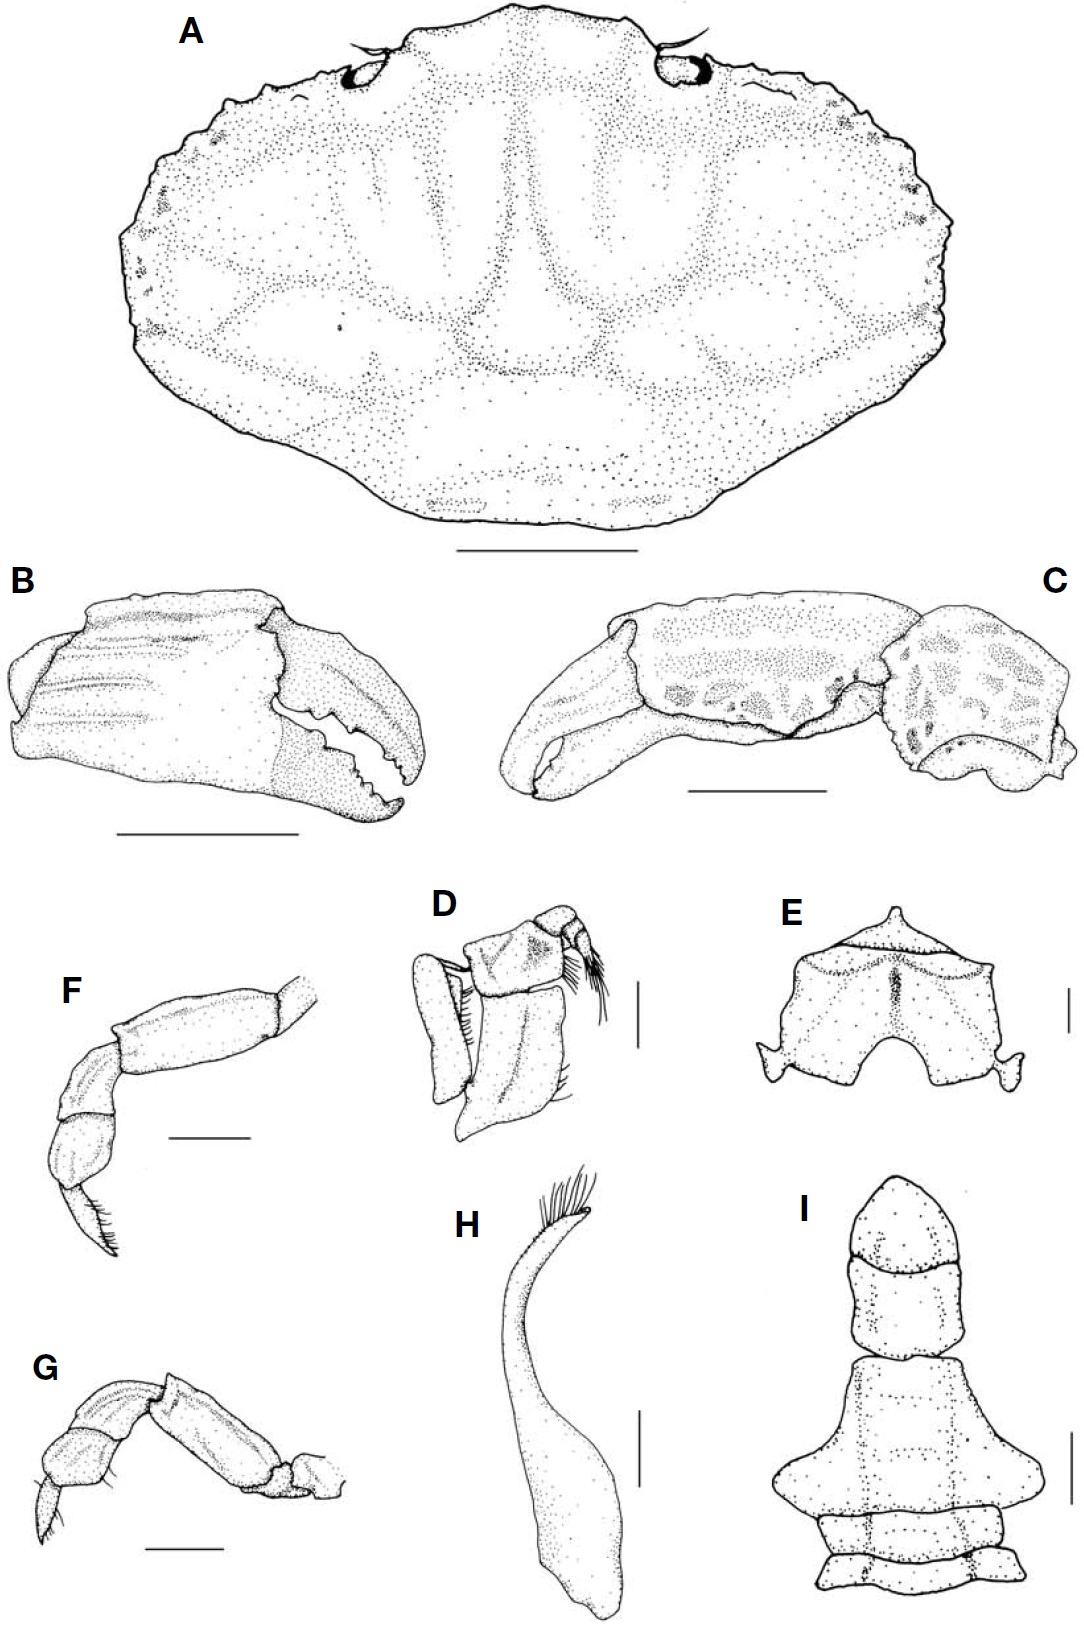 Danielea noelensis (Ward 1934). A Carapace dorsal view; B Right cheliped outer view; C Right cheliped dorsal view; D Right 3rd maxilliped; E Sternites 1-4; F 3rd ambulatory leg dorsal view; G 4th ambulatory leg dorsal view; H Left first gonopod ventral view; I Abdomen of male. Scale bars: A C=3 mm B=5mm D E I=1 mm F G=2 mm H=0.5 mm.